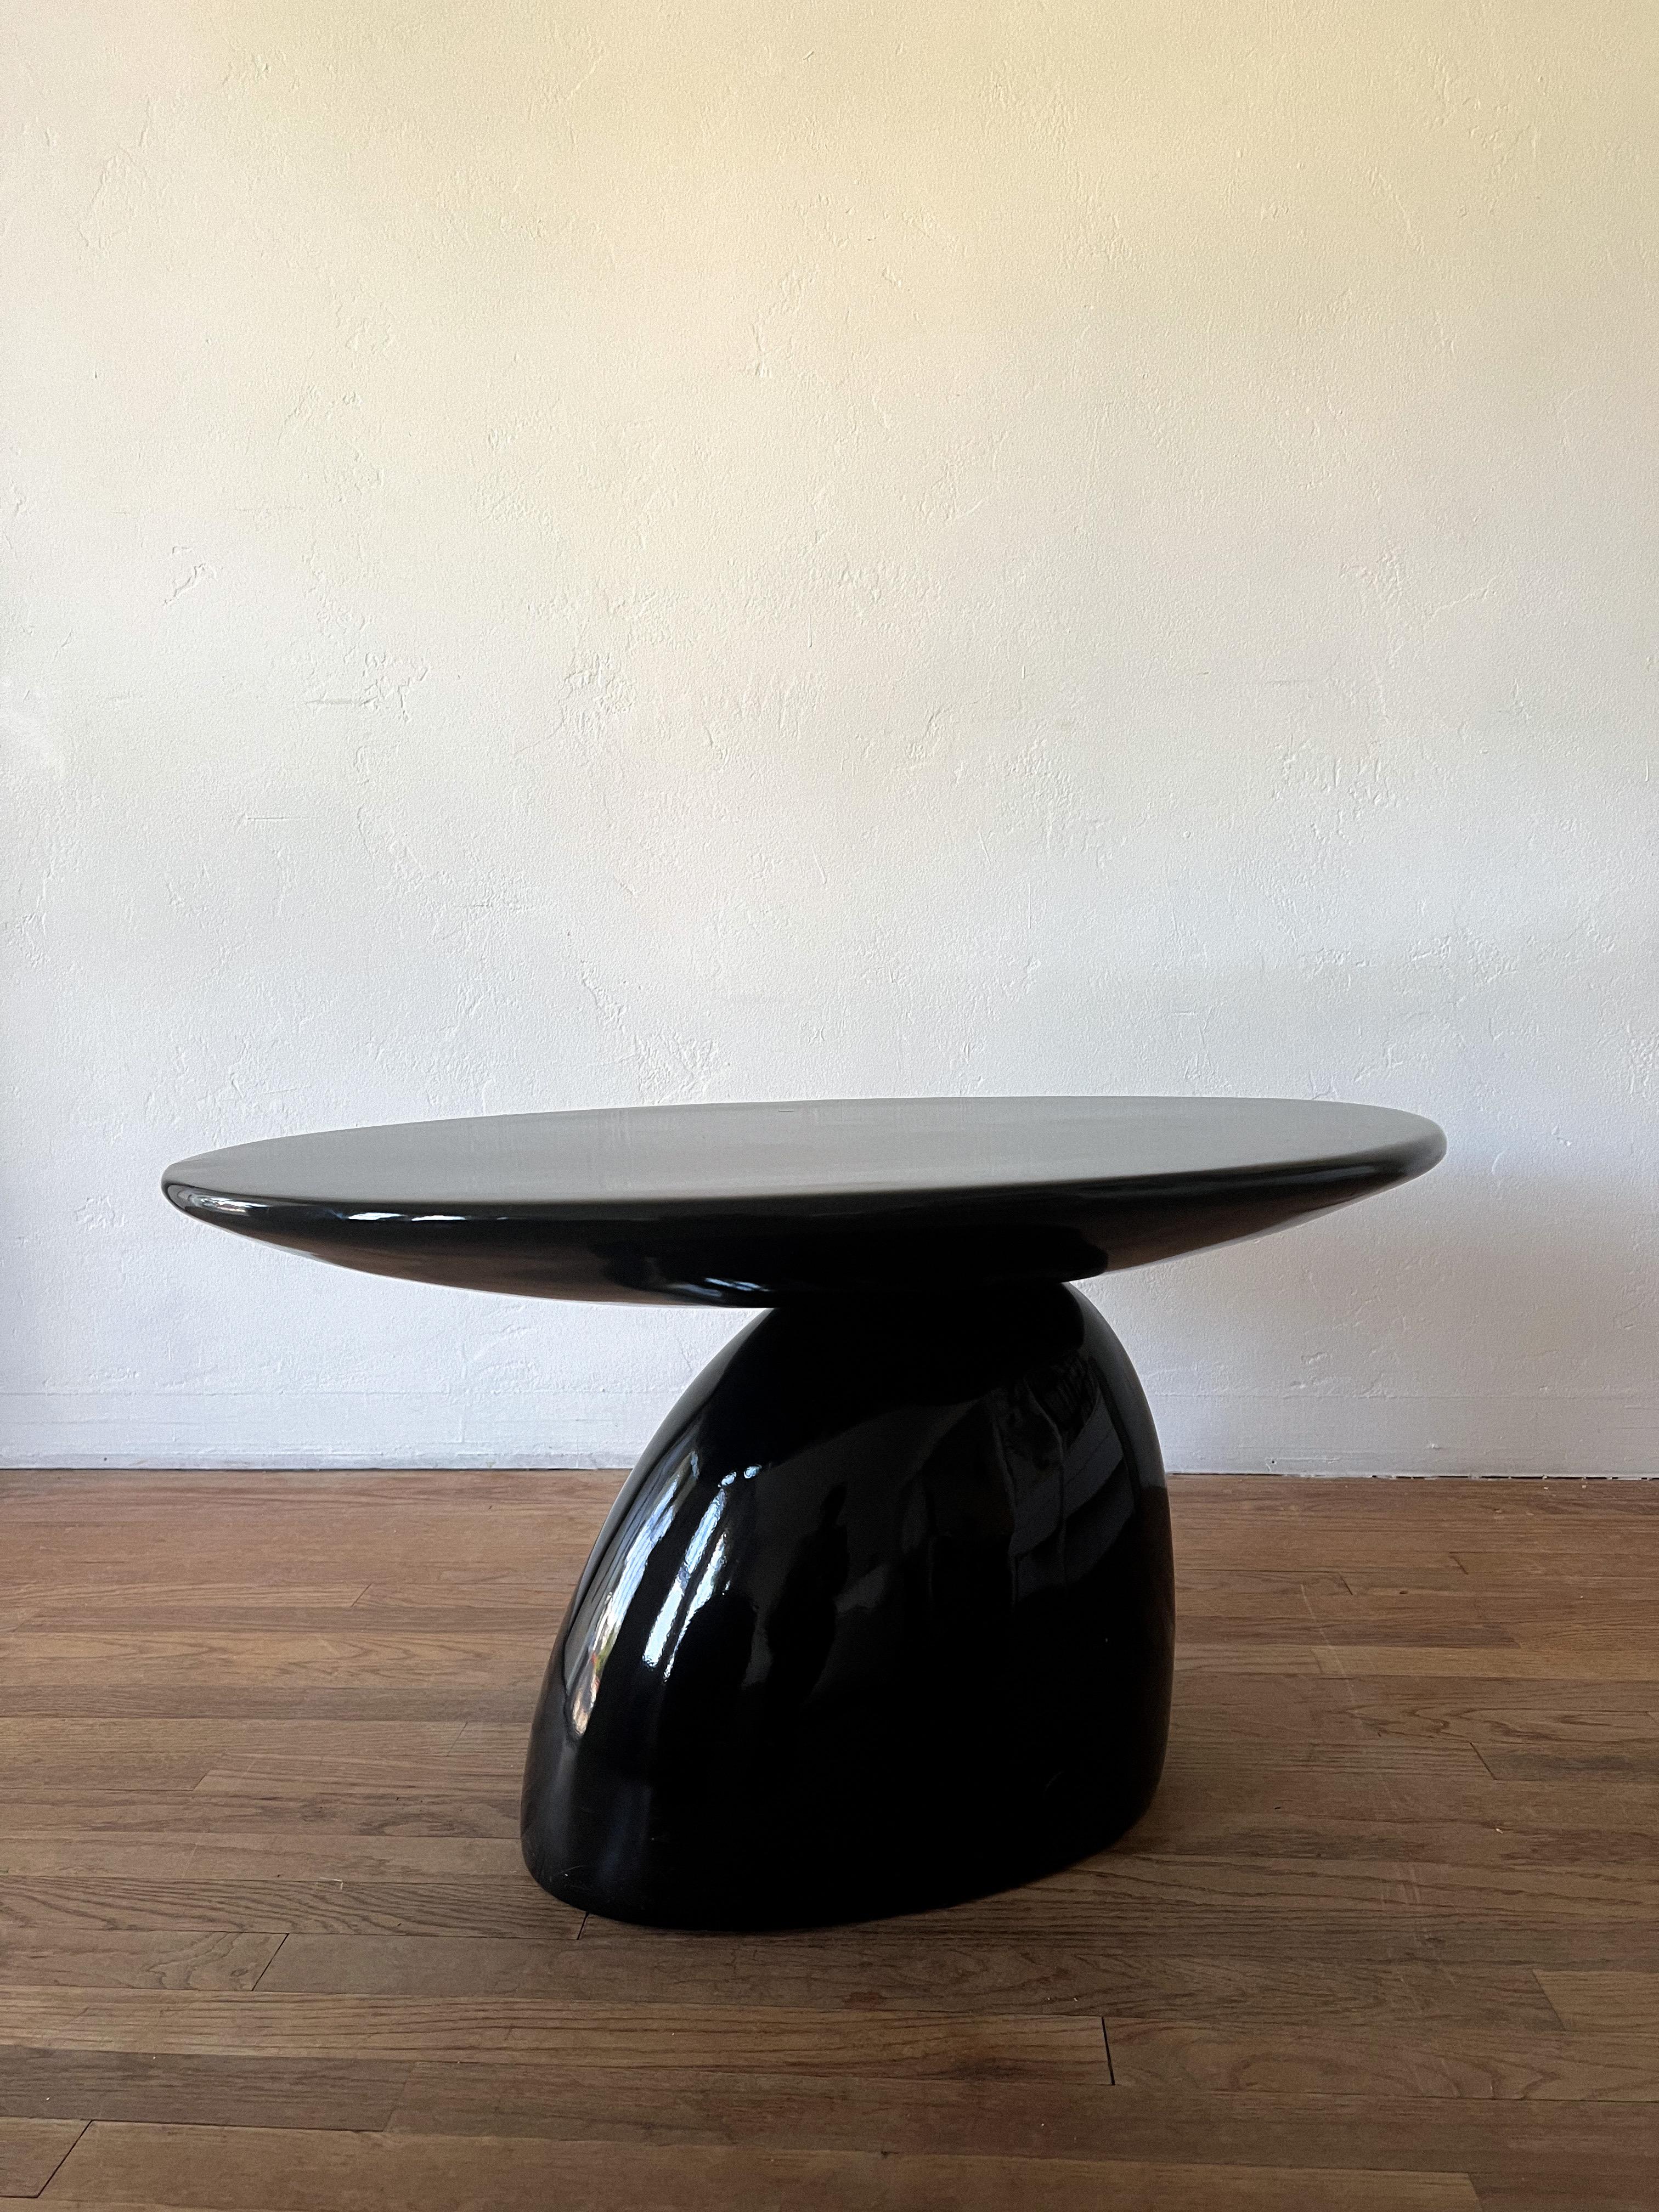 Space Age “Parabel” Style Side Table Attributed to Eero Aarnio For Sale 3